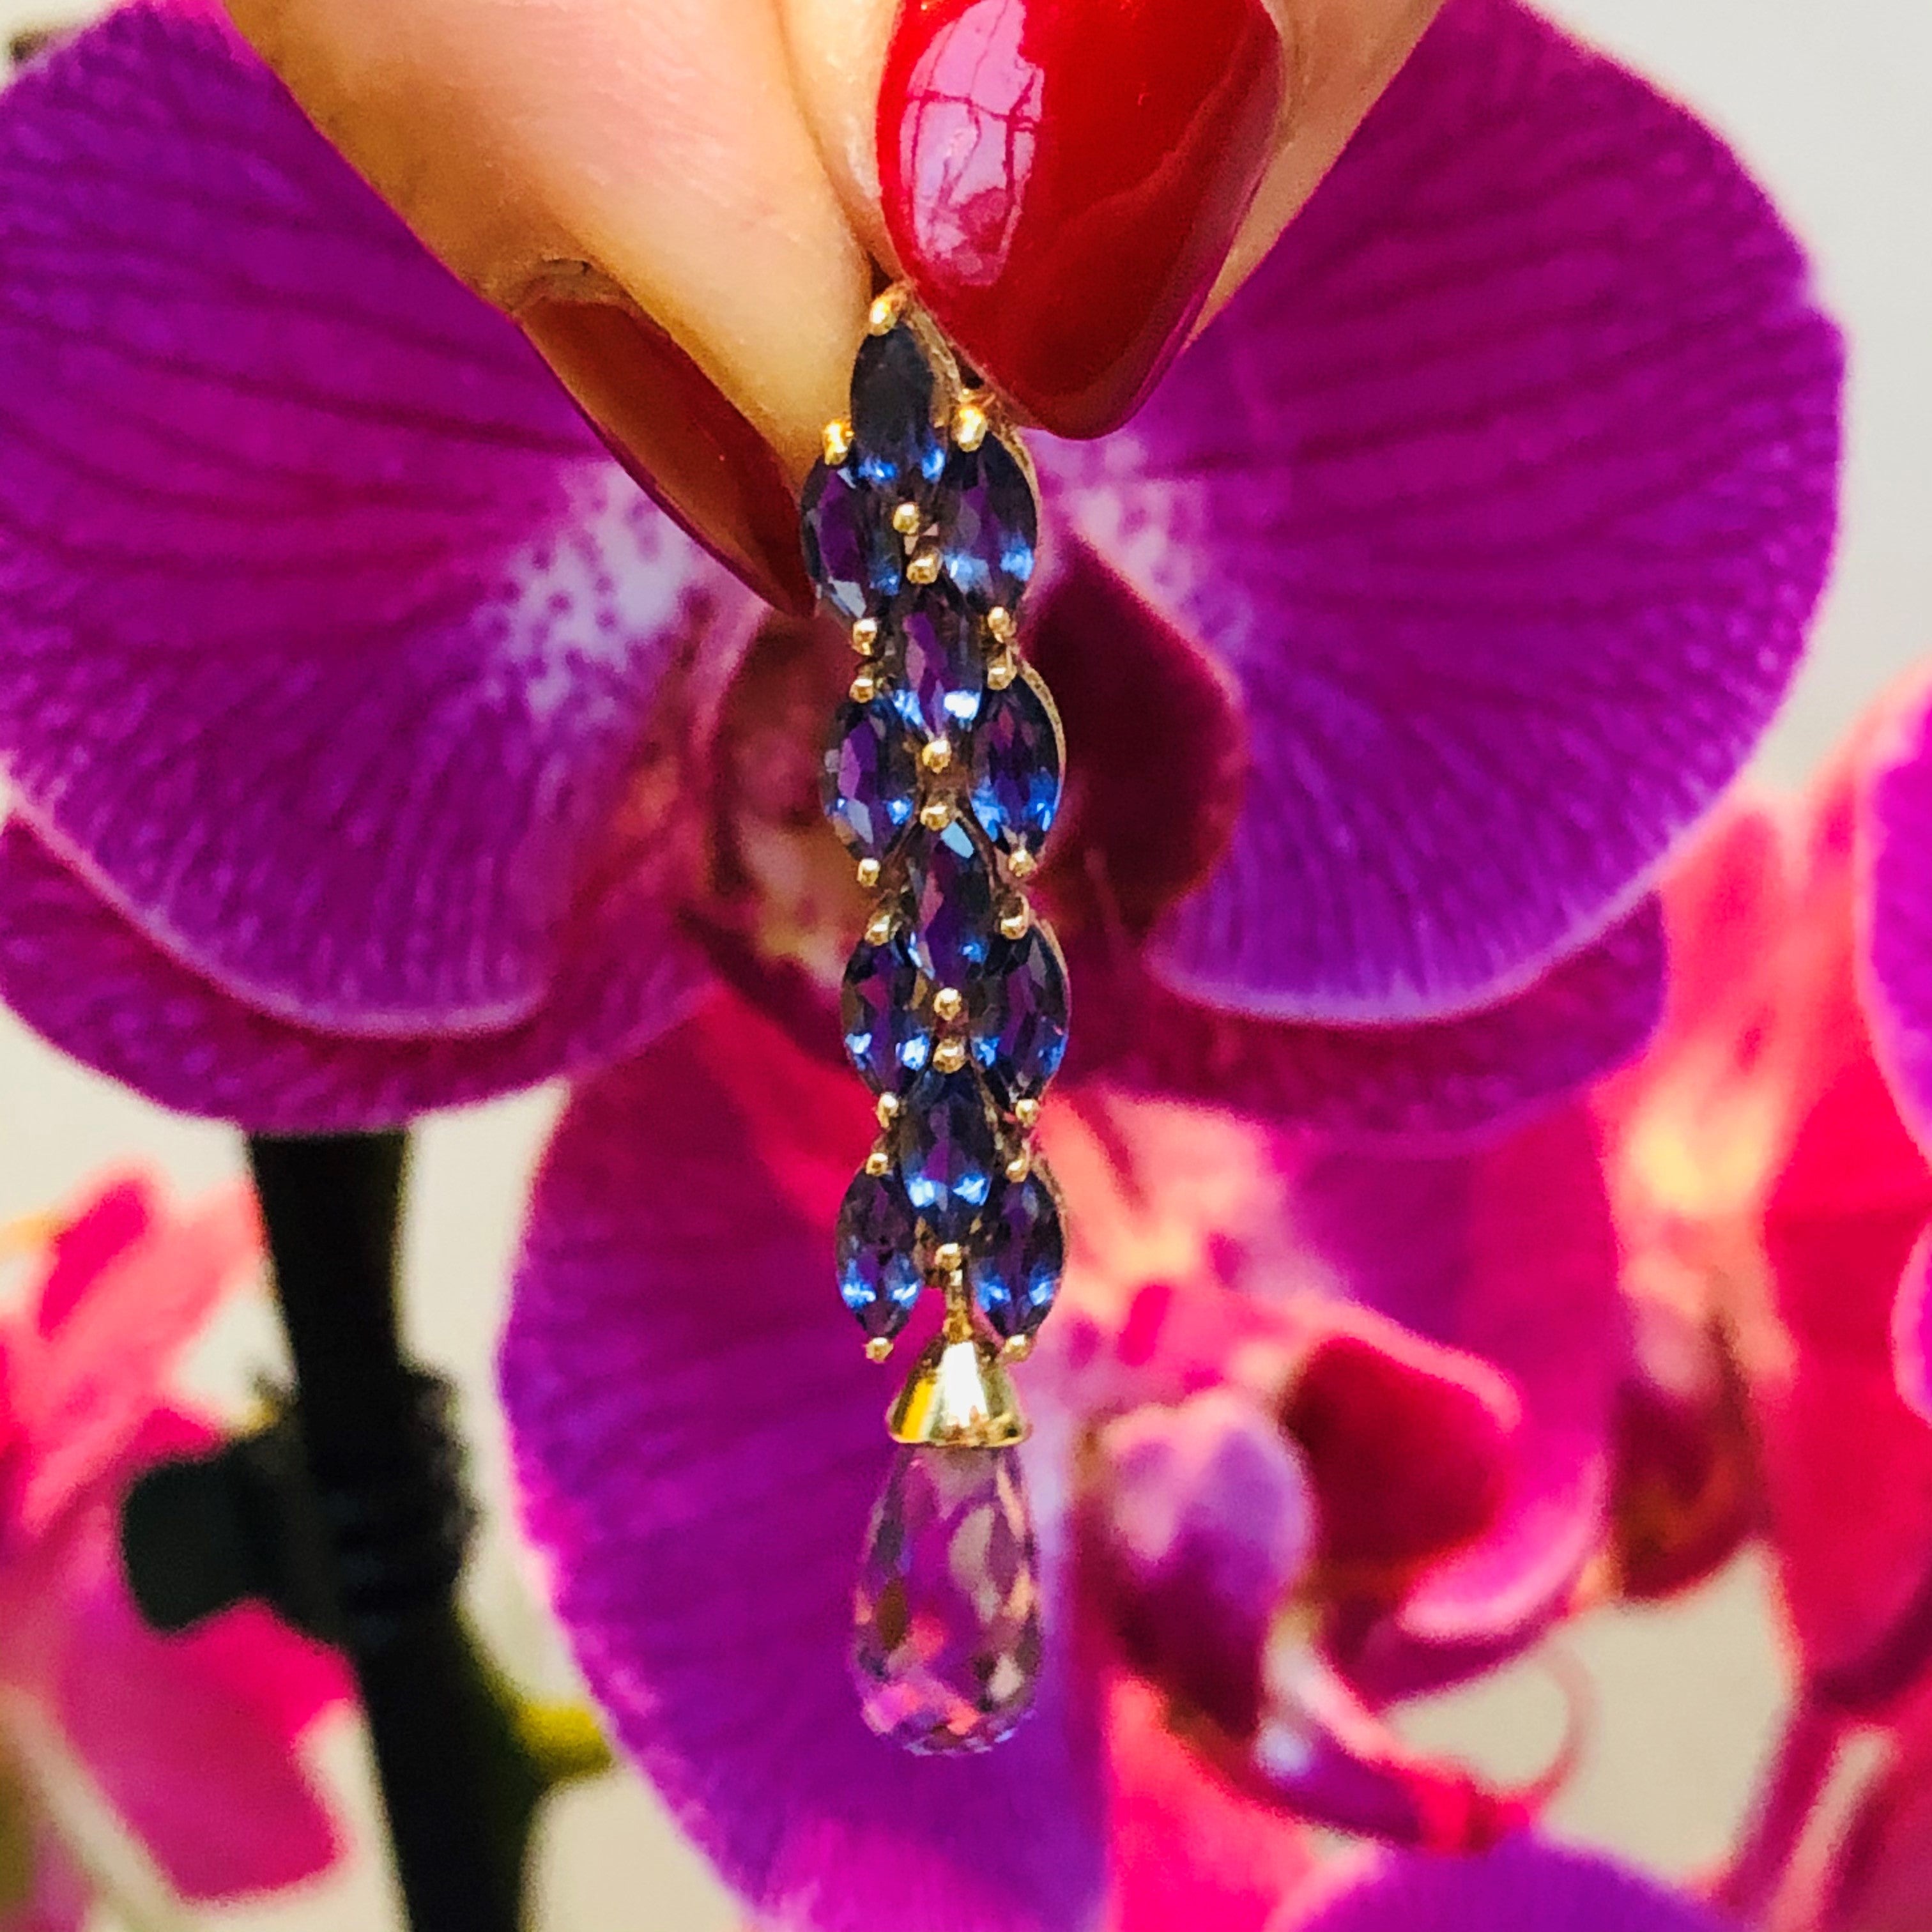 Alluring Amethyst & Iolite Cocktail Earring being held by models thumb and forefinger, models nails are painted a red pink colour photographed with a purple orchid flower in the background